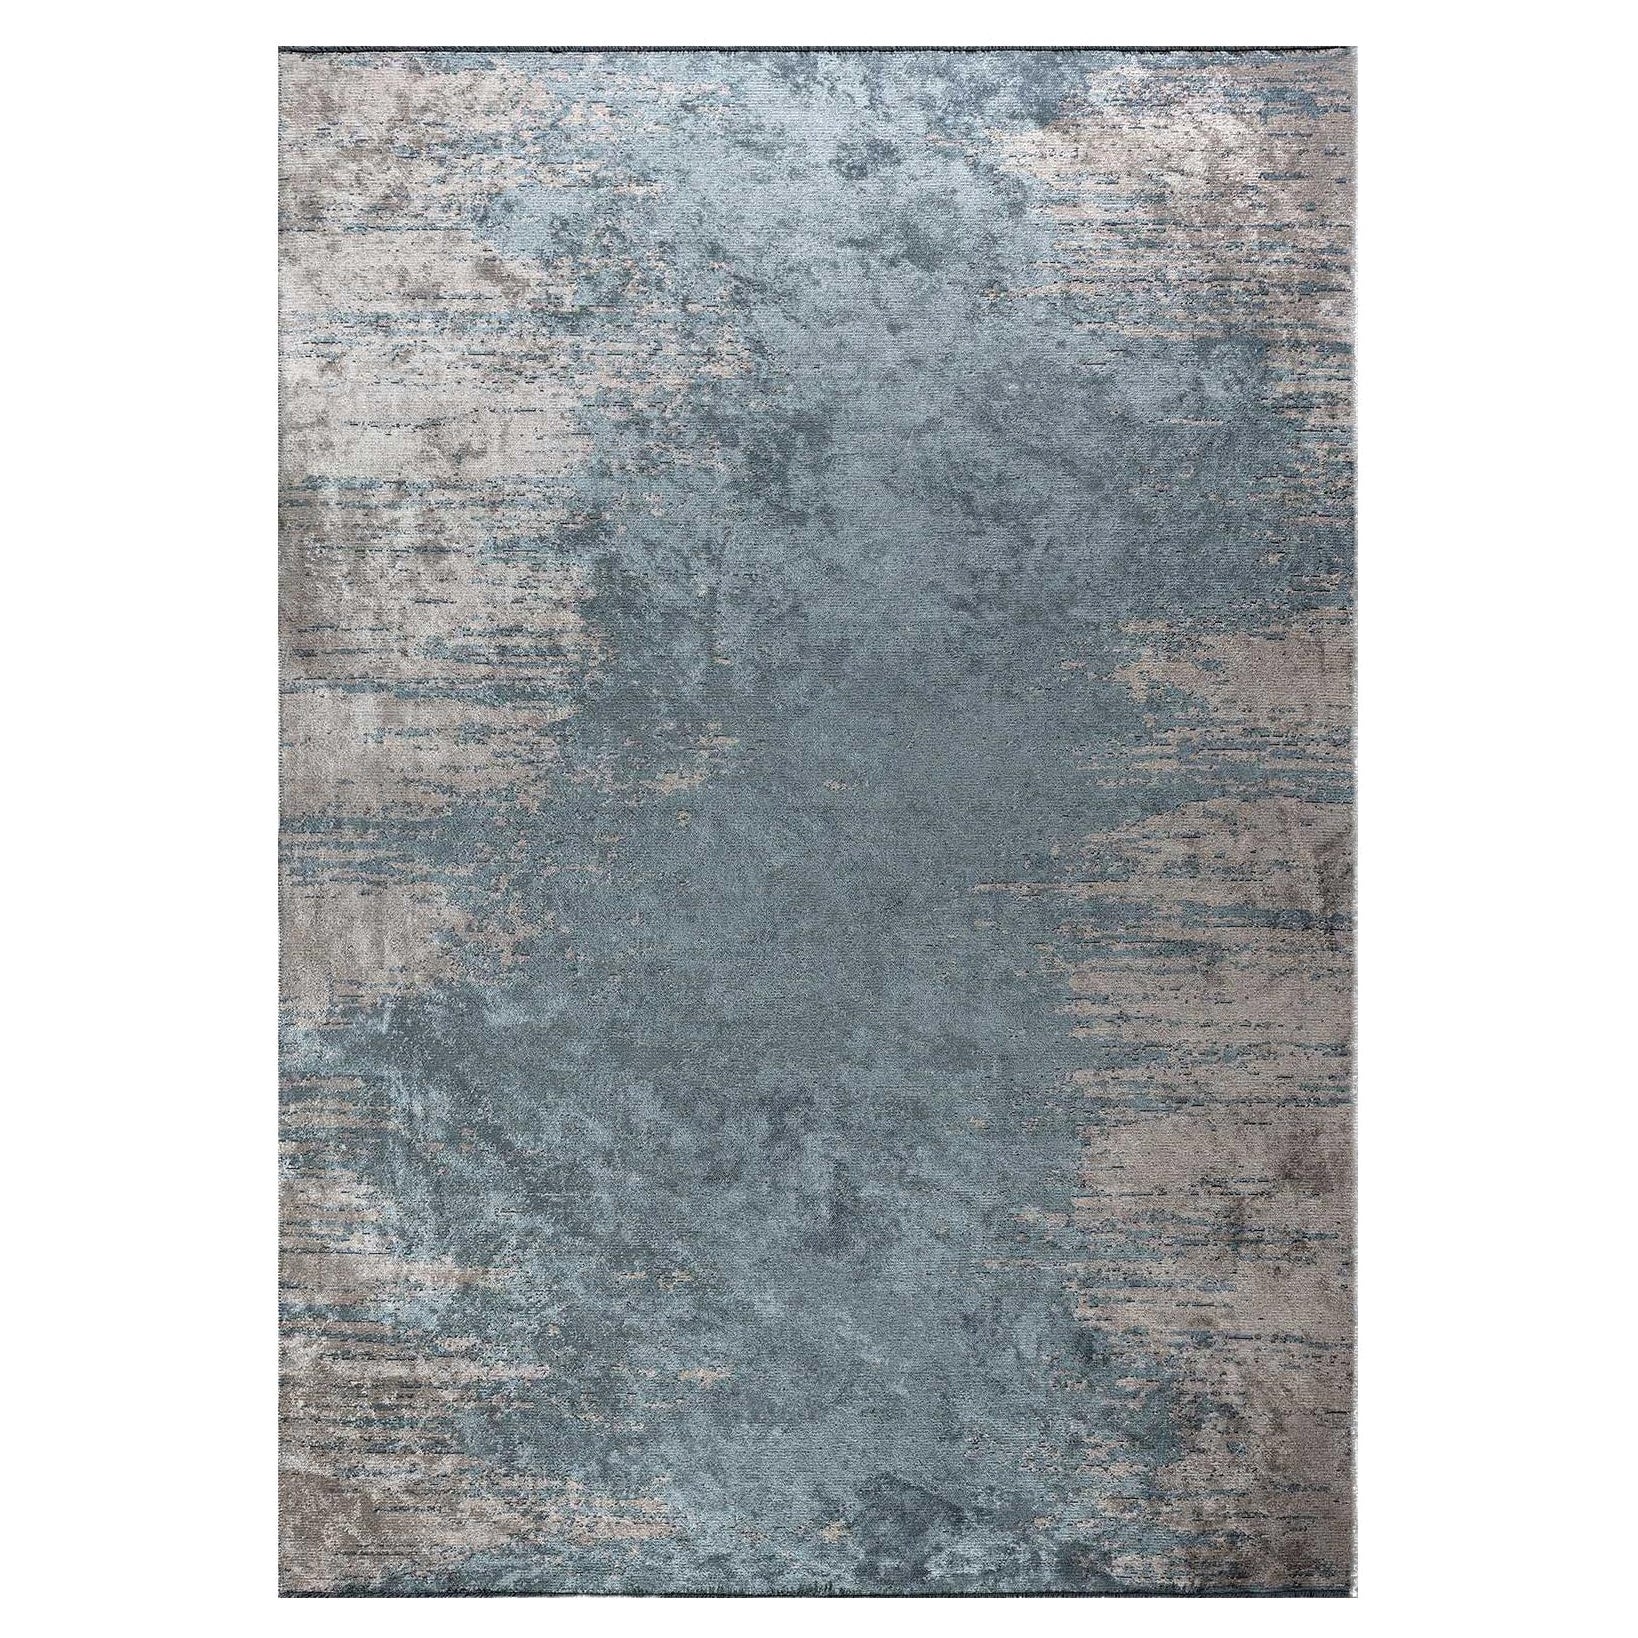 Modern Light Blue Silver Abstract Chenille Rug Without Fringe Ready to Ship